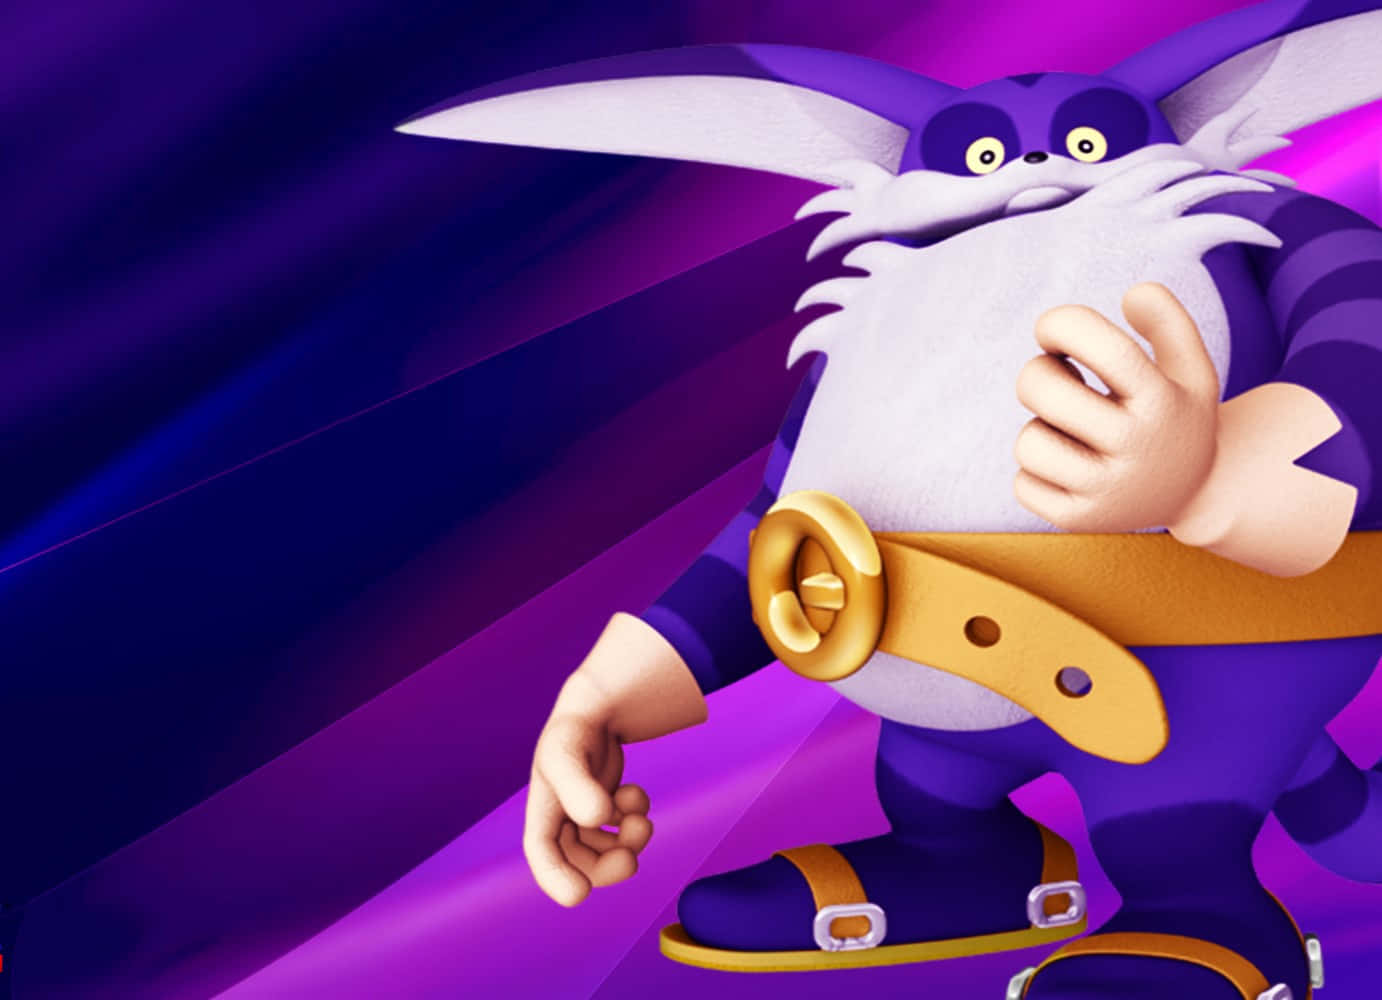 Caption: Big the Cat in action Wallpaper